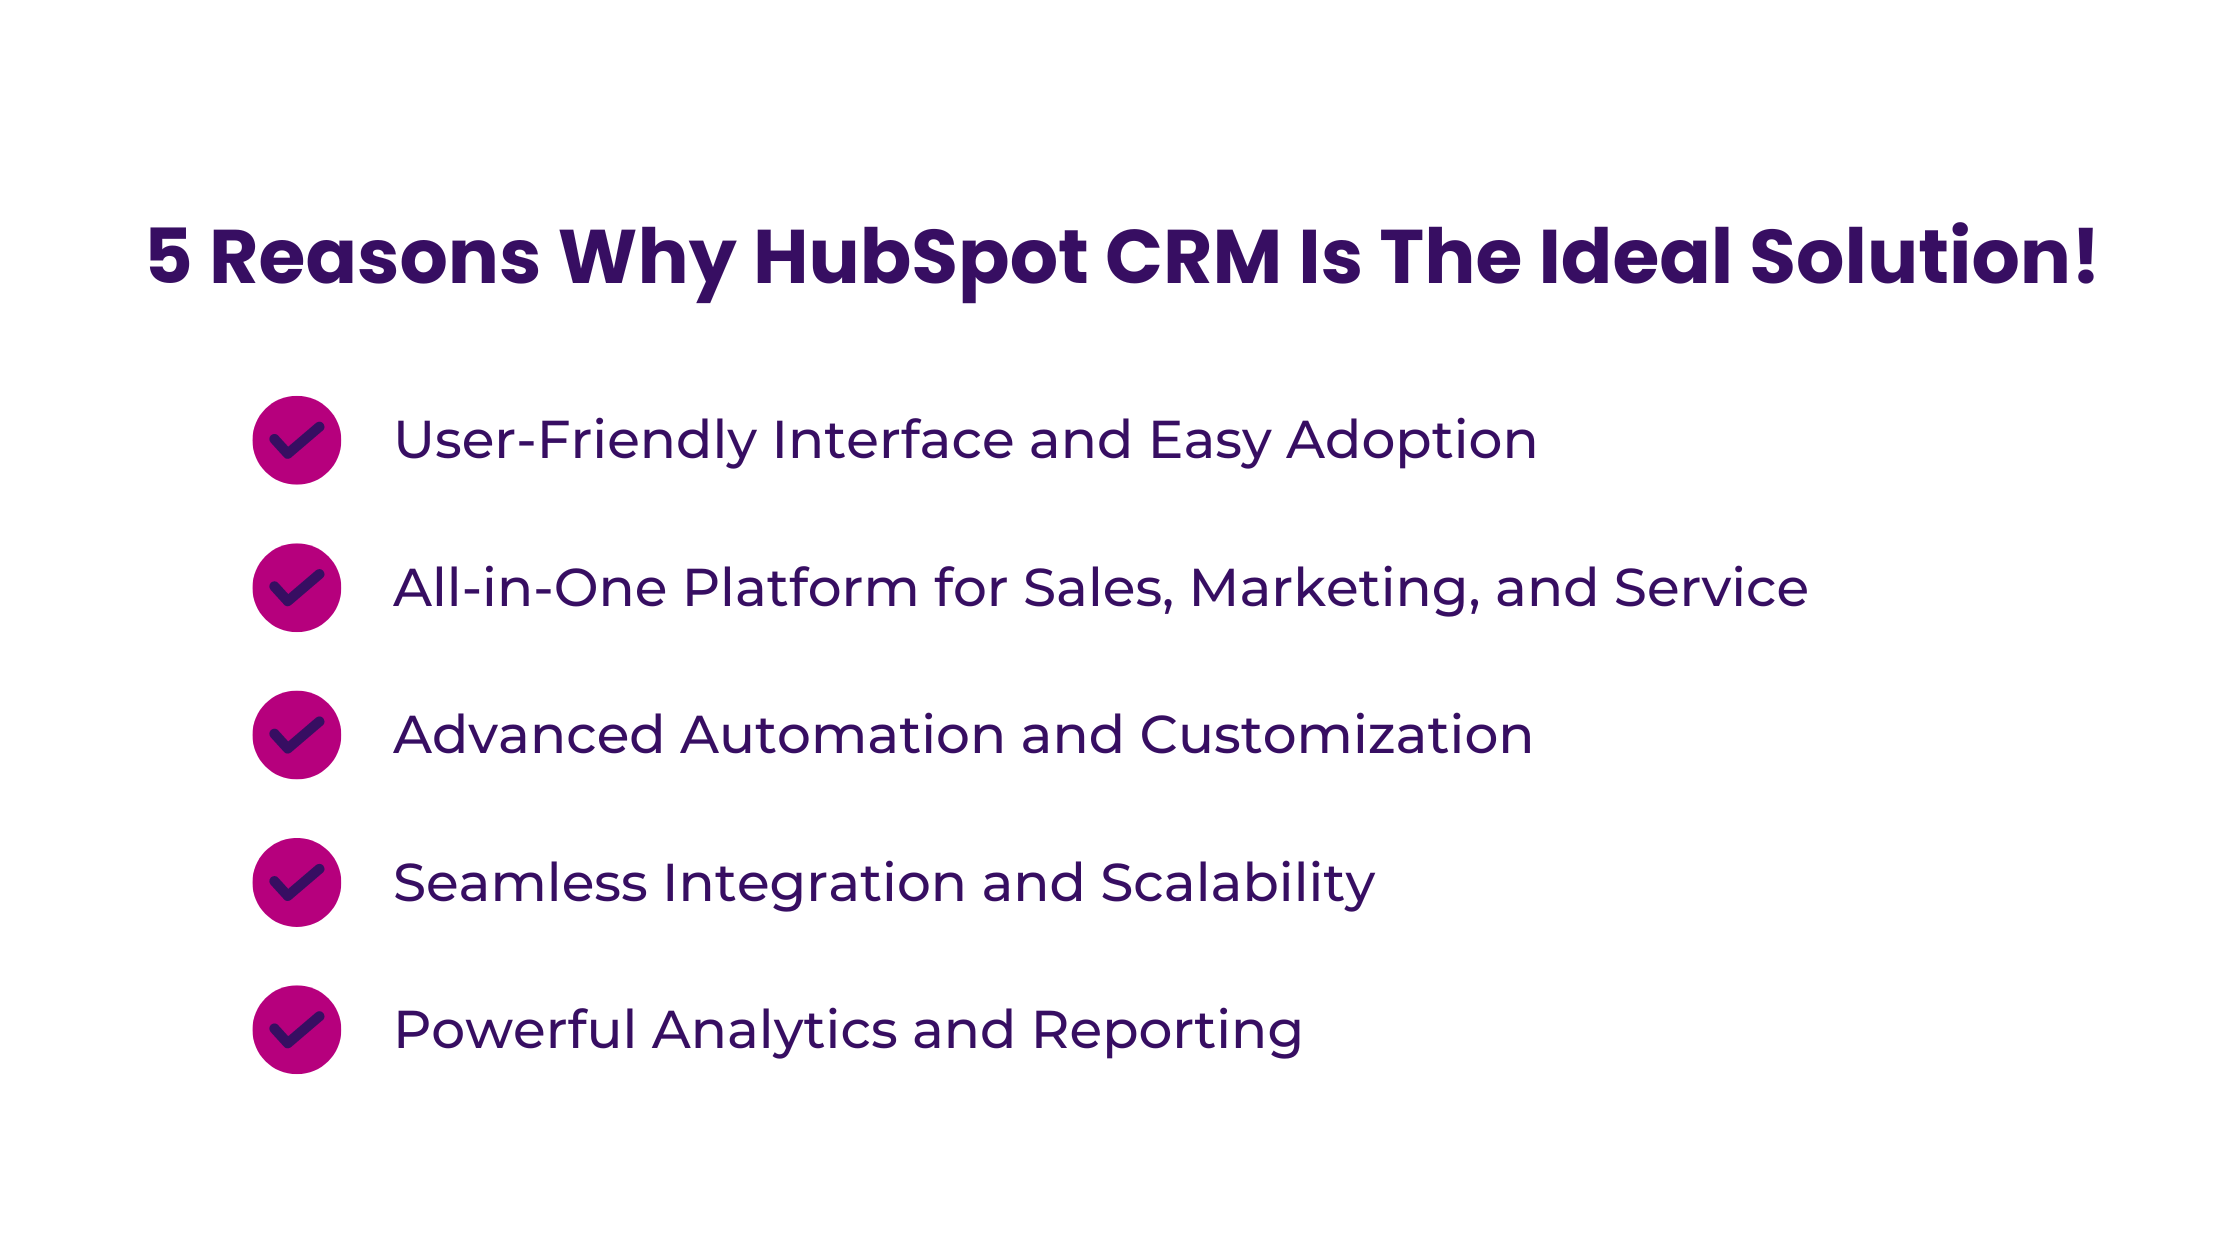 5 Reasons Why HubSpot CRM Is The Ideal Solution!